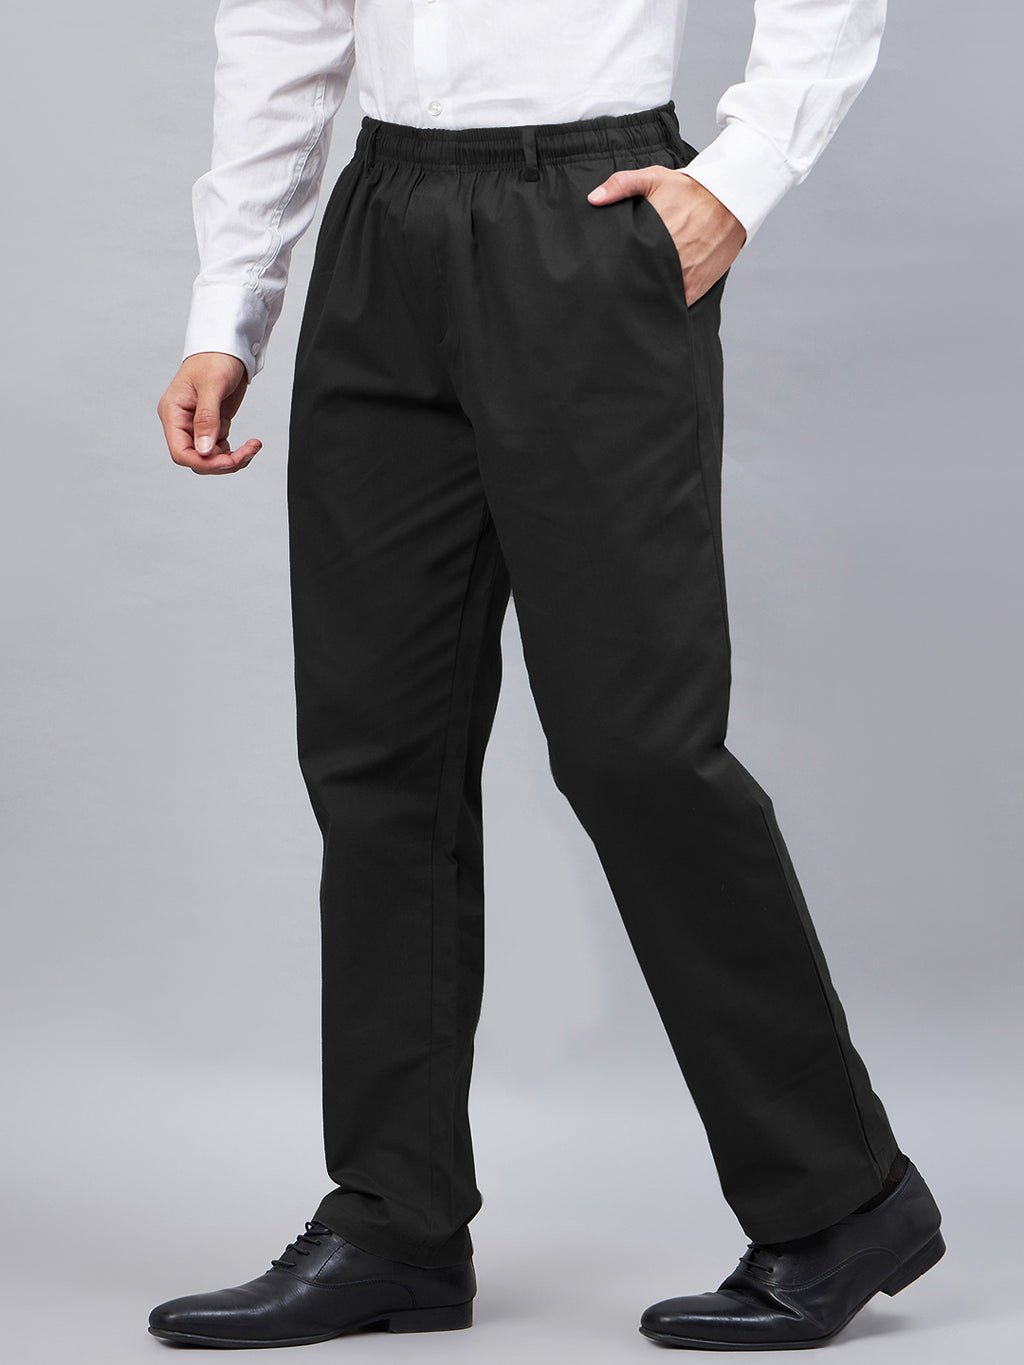 Men's Elastic Waist Pants For Seniors or the Disabled - Silverts